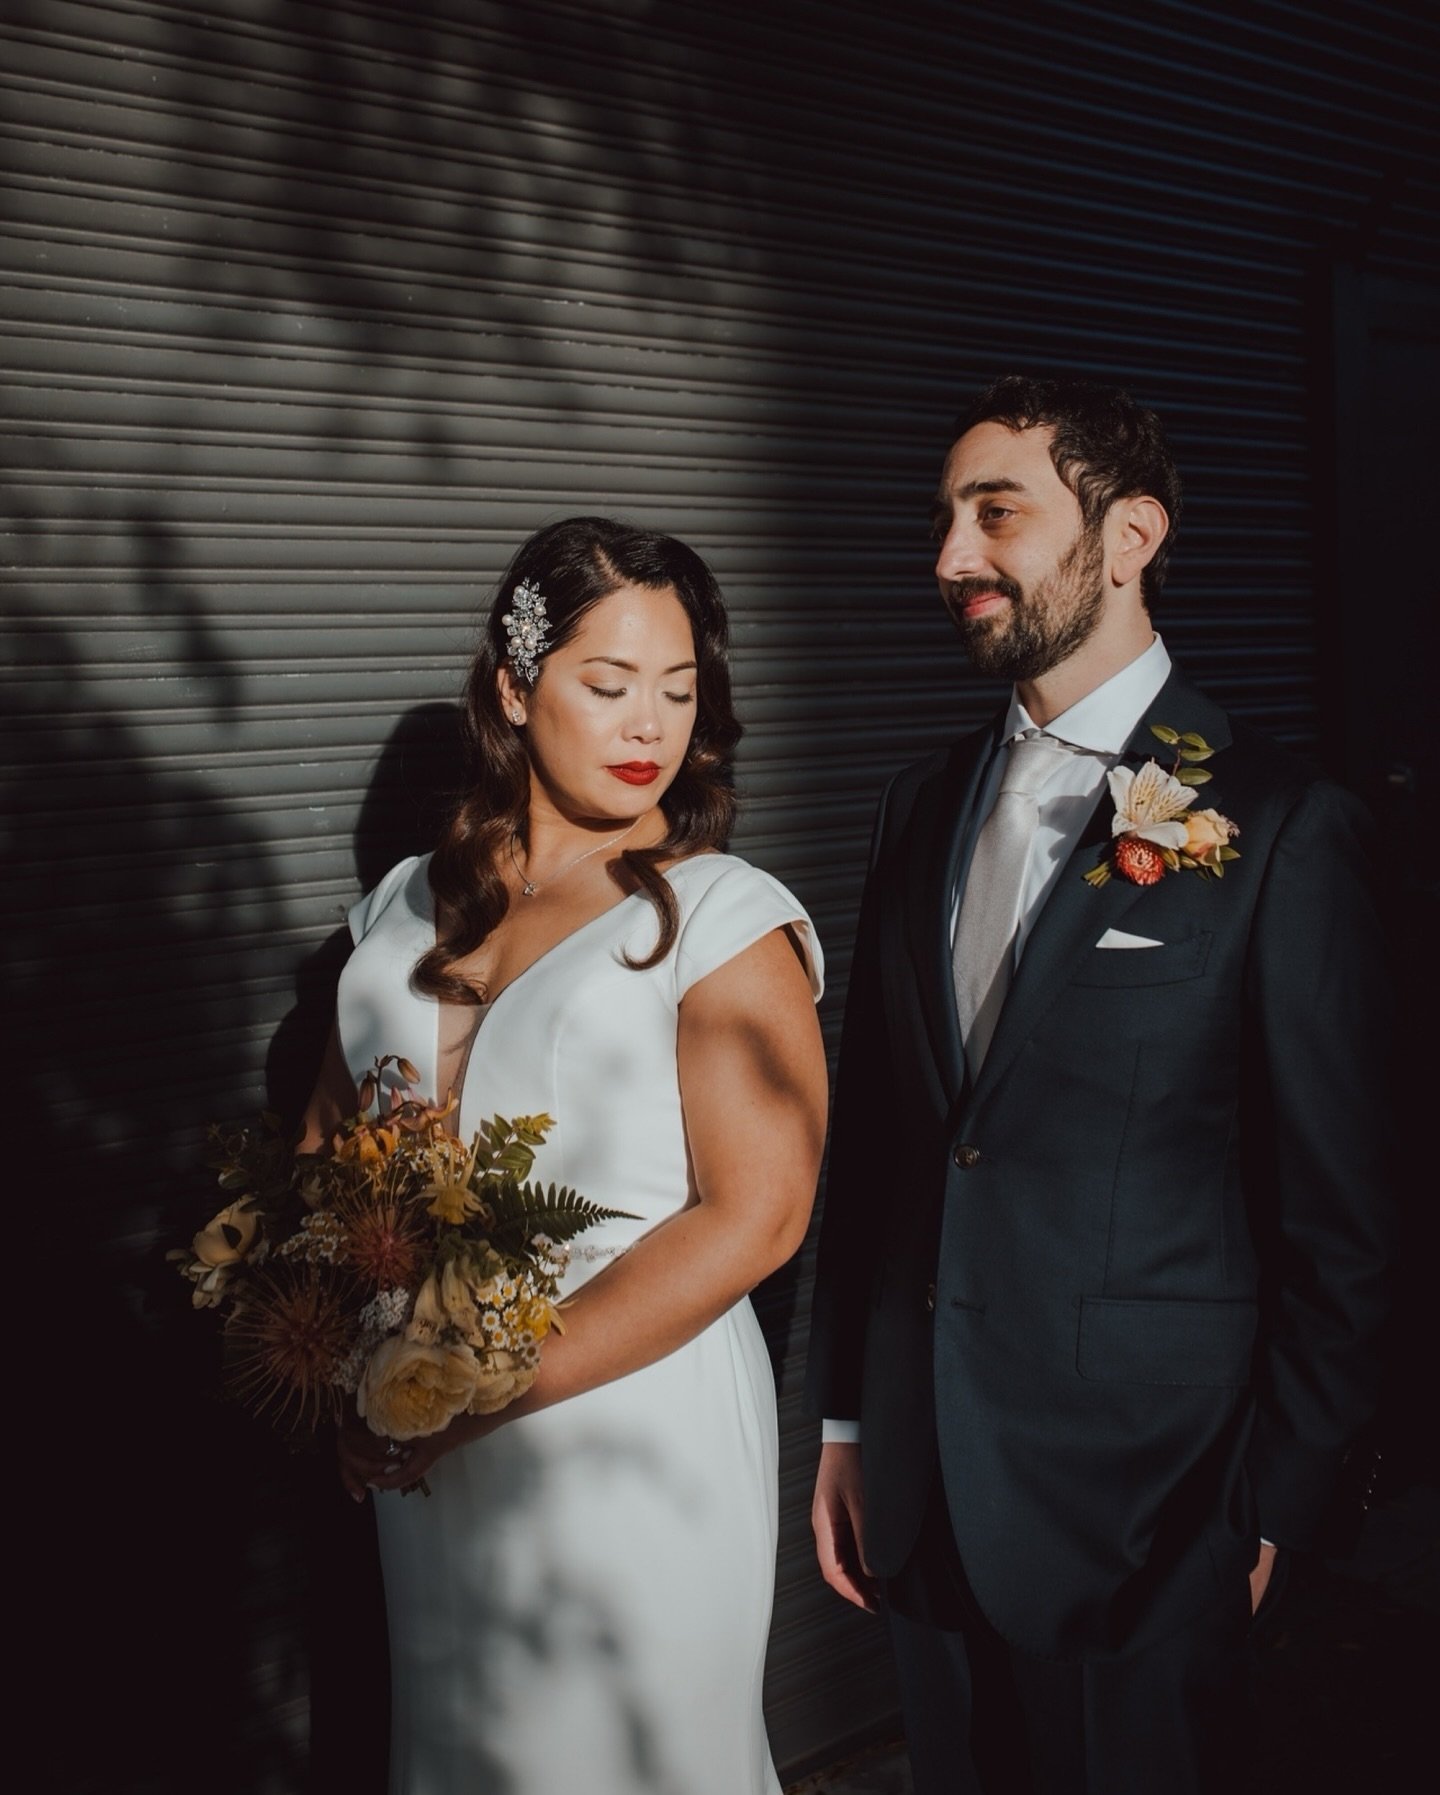 I just about fall off the couch from excitement every time I get emails from friends asking me to be their wedding photographer. 💕

Melissa and Matthew&rsquo;s Sf Mission District wedding encompassed all of my favorite wedding elements: street photo